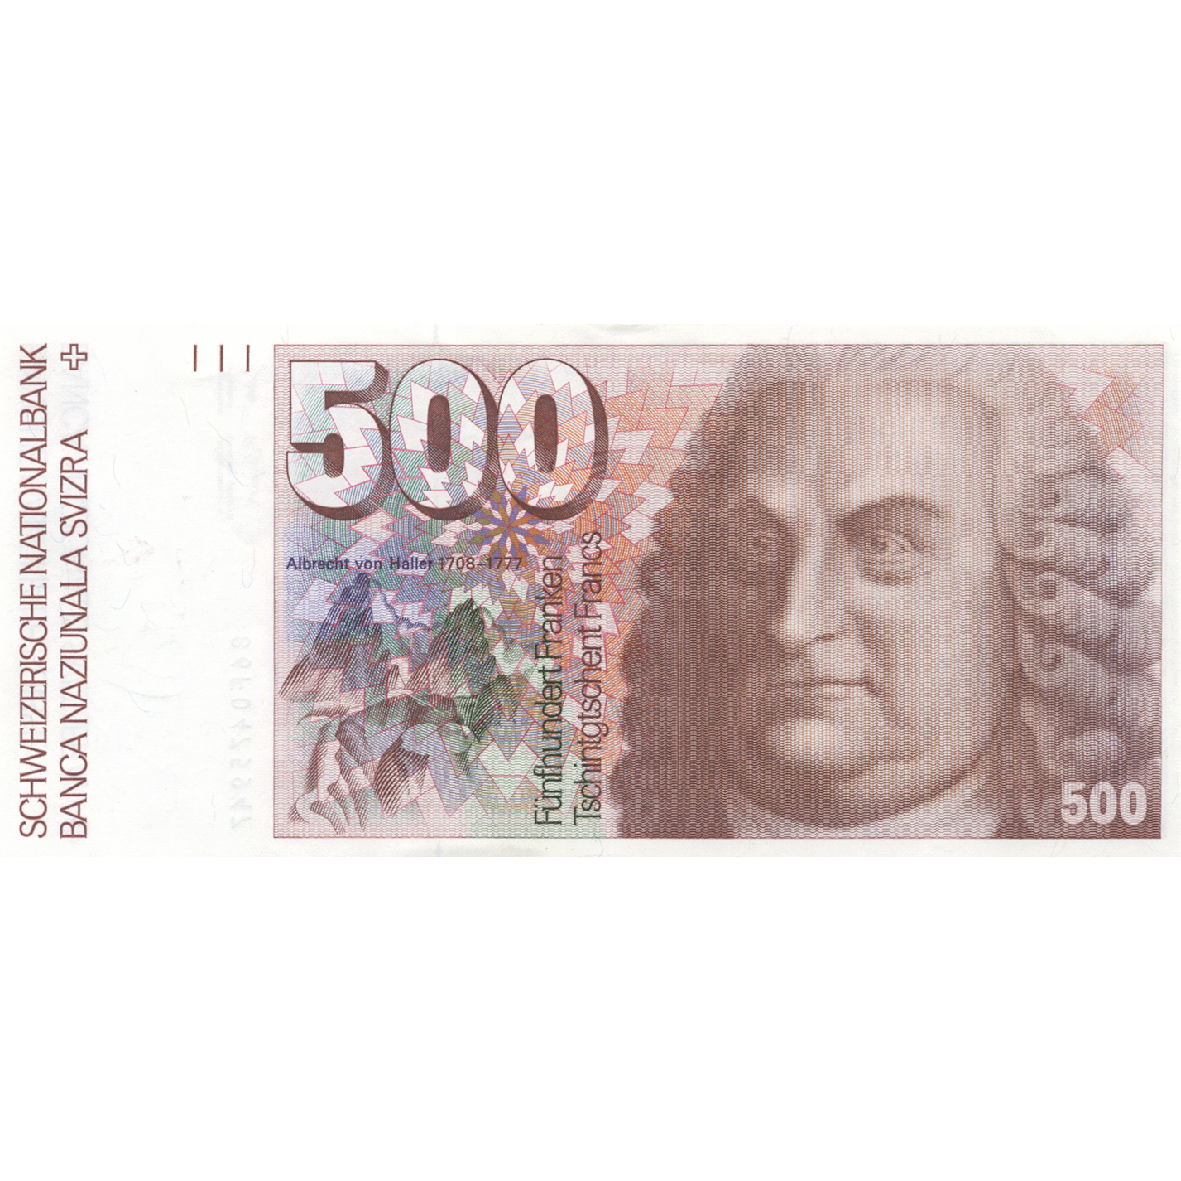 Swiss Confederation, 500 Francs (6th Banknote Series, in Circulation 1976-2000) (obverse)